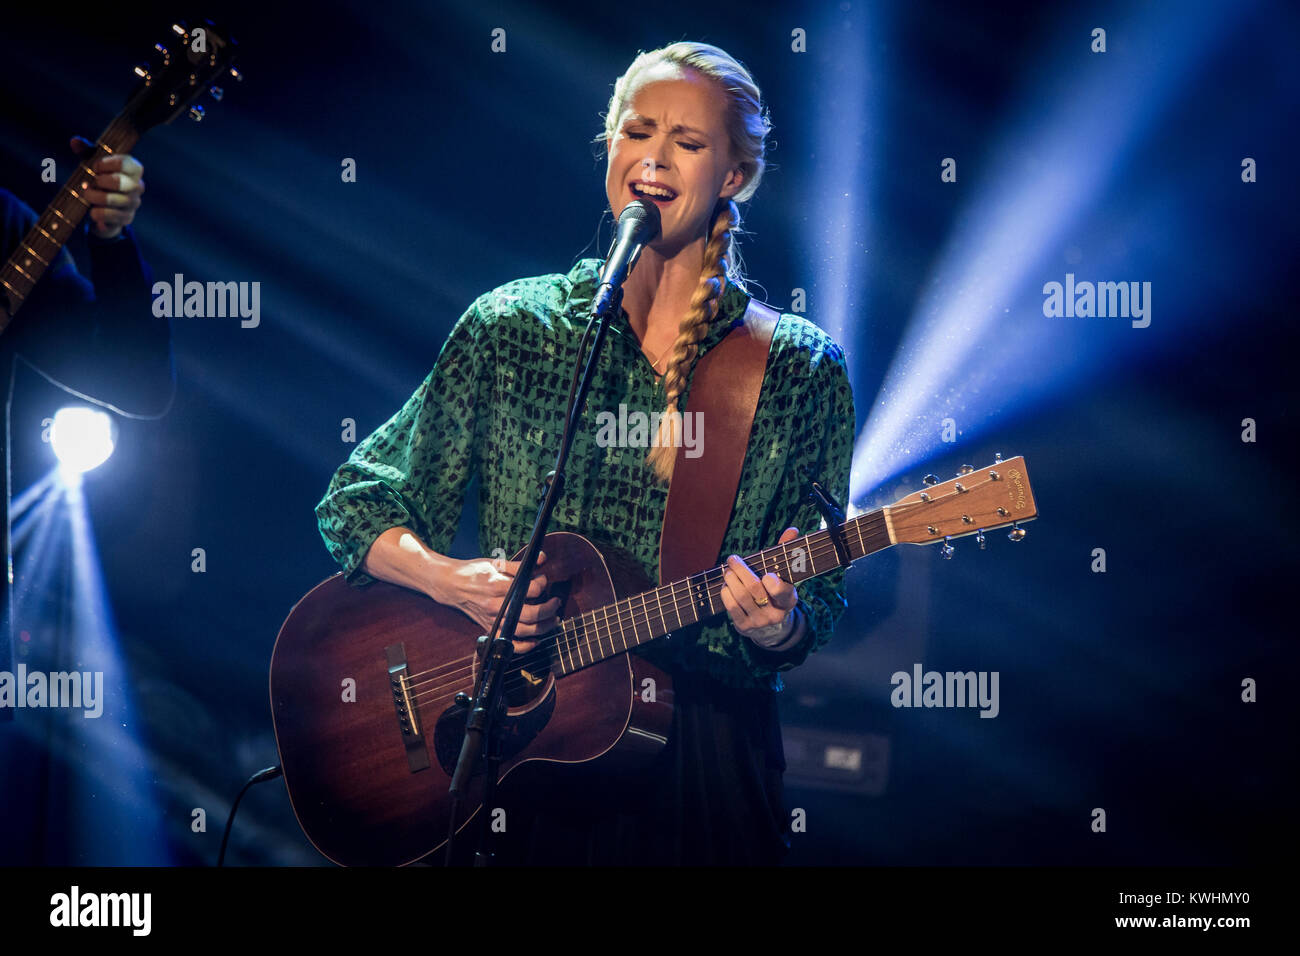 The Danish singer, musician and songwriter Tina Dickow (known as Tina Dico  abroad) performs a live concert the Gaffa Awards 2014 in Copenhagen.  Denmark, 04/12 2014 Stock Photo - Alamy